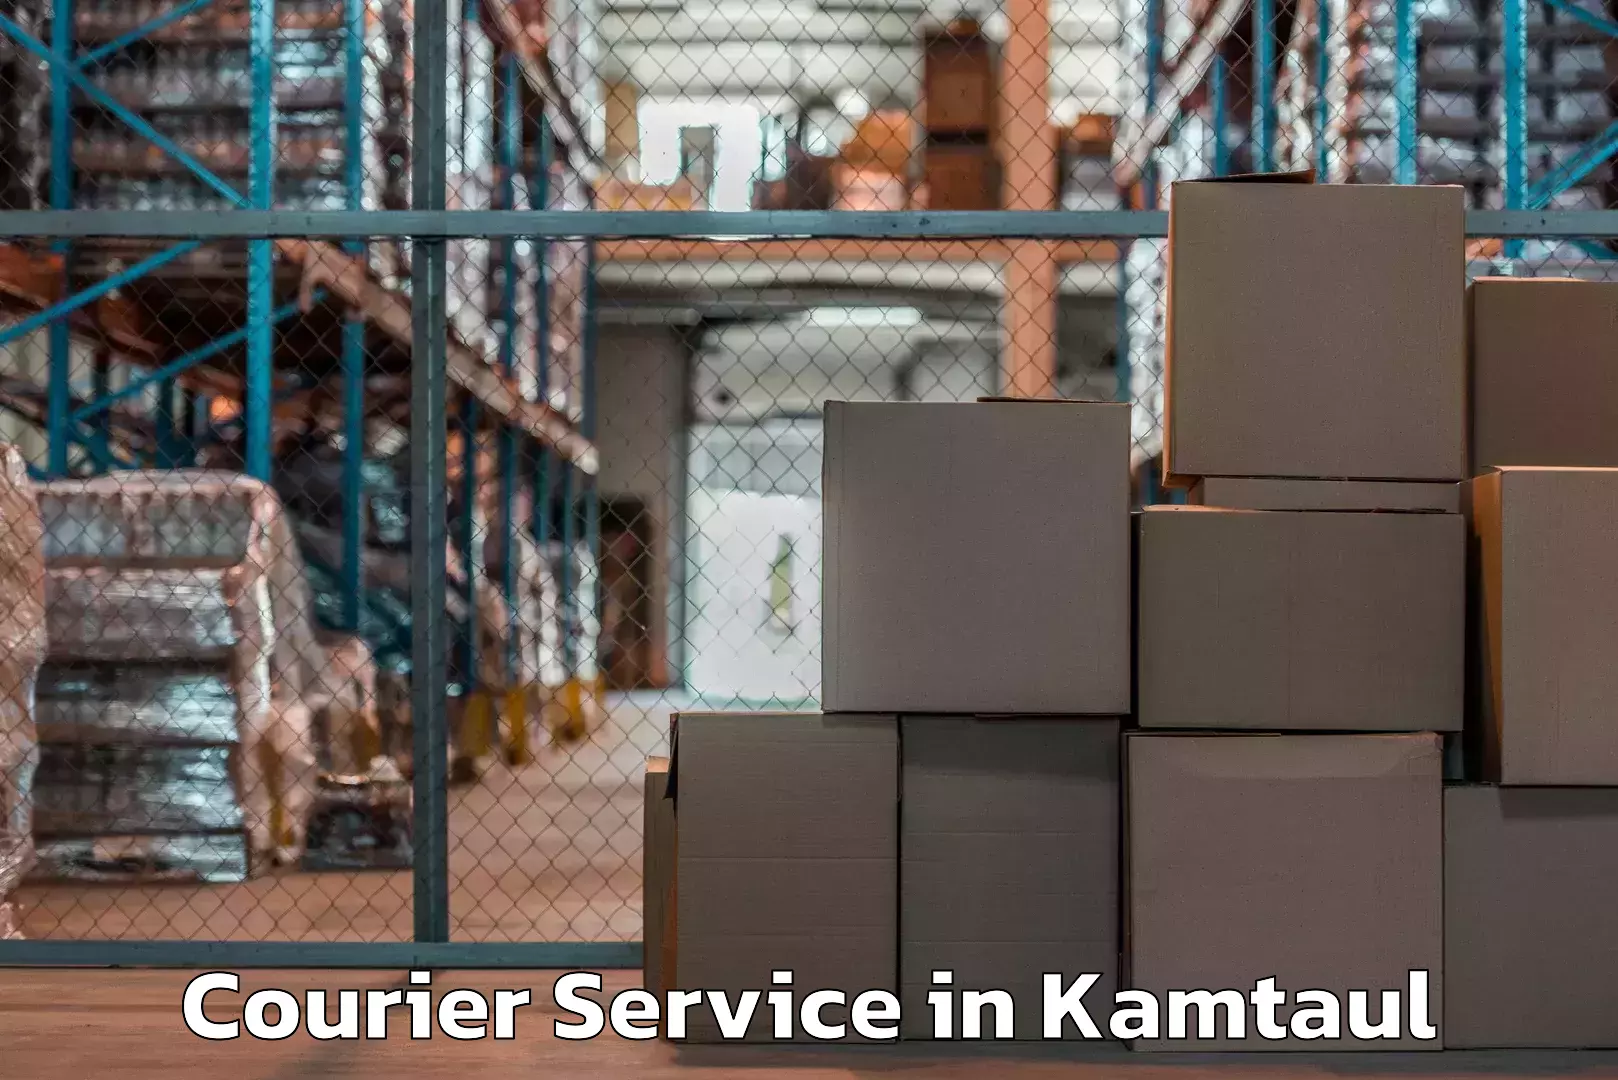 On-call courier service in Kamtaul